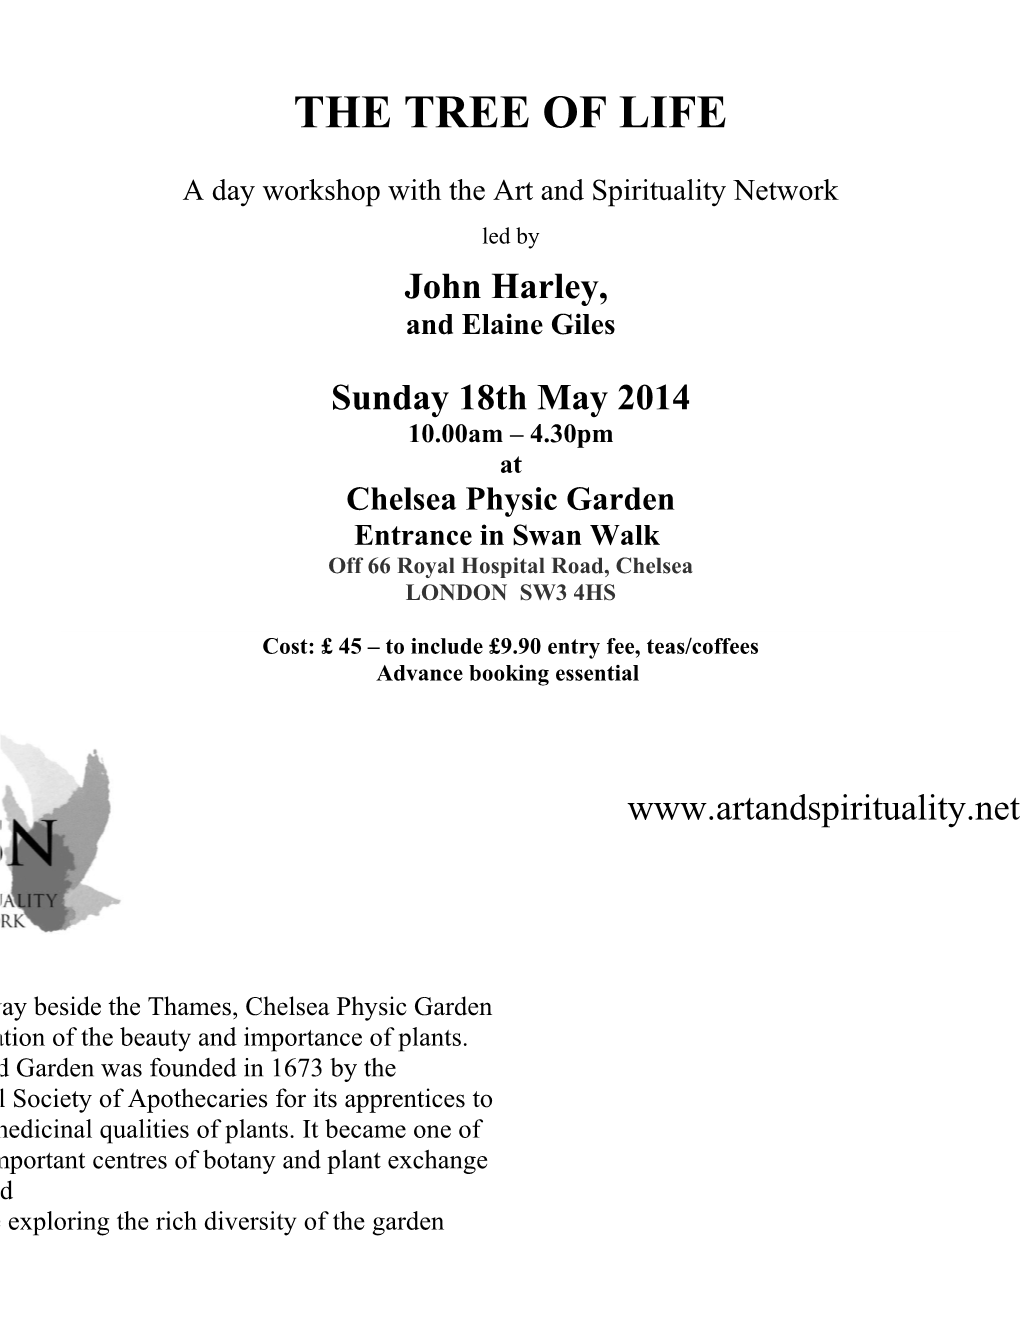 A Day Workshop with the Art and Spirituality Network